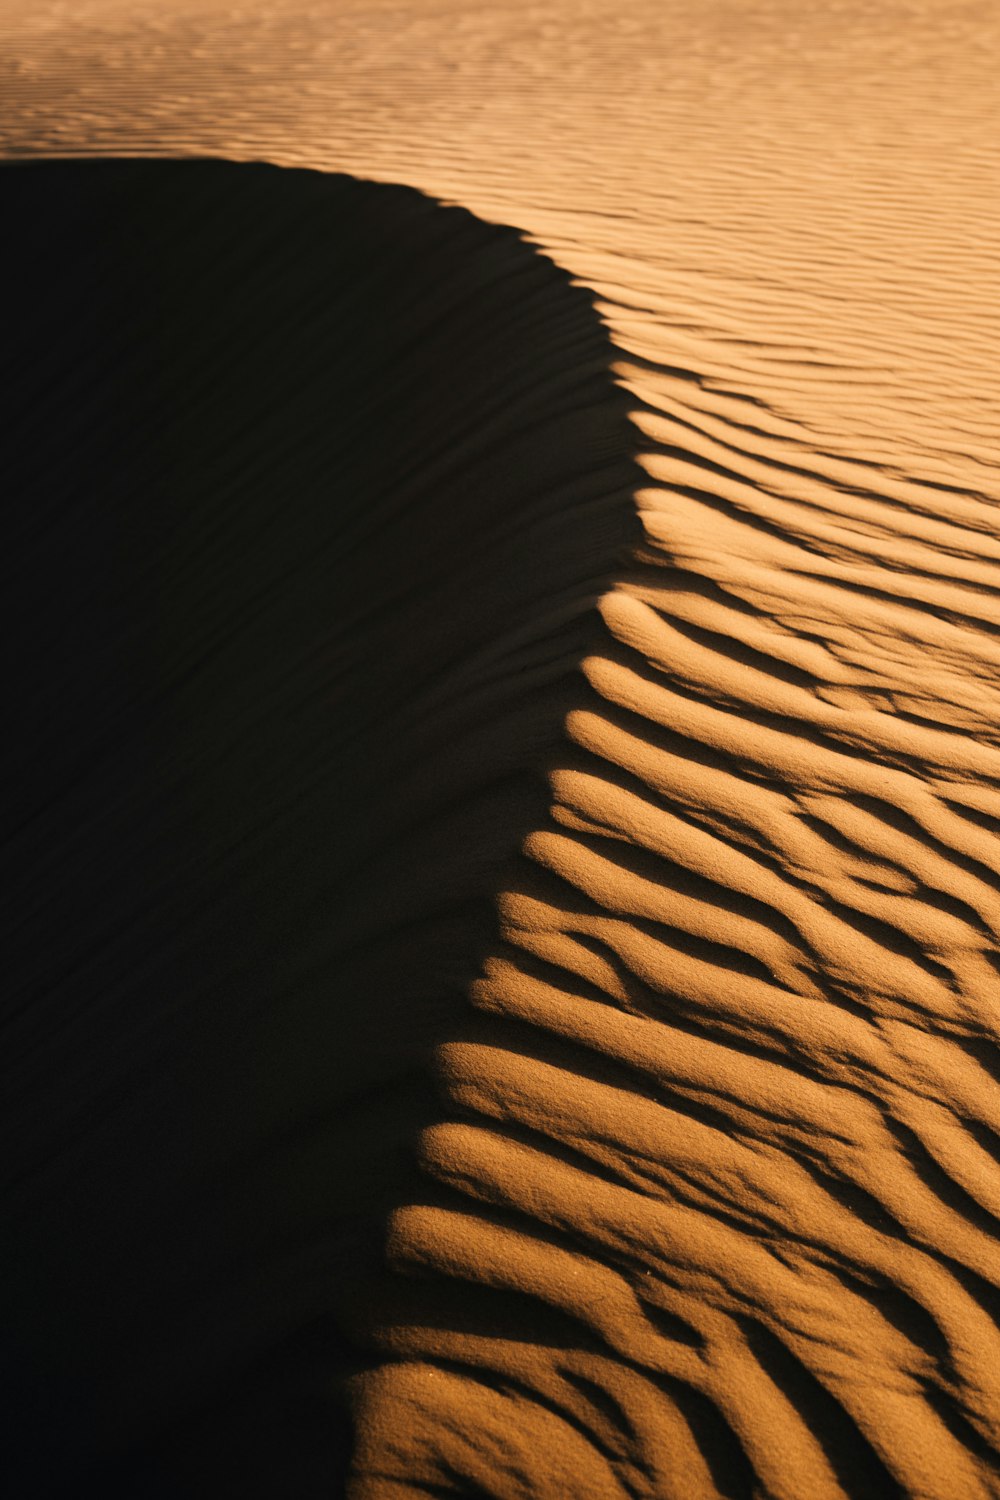 the shadow of a person standing on a sand dune